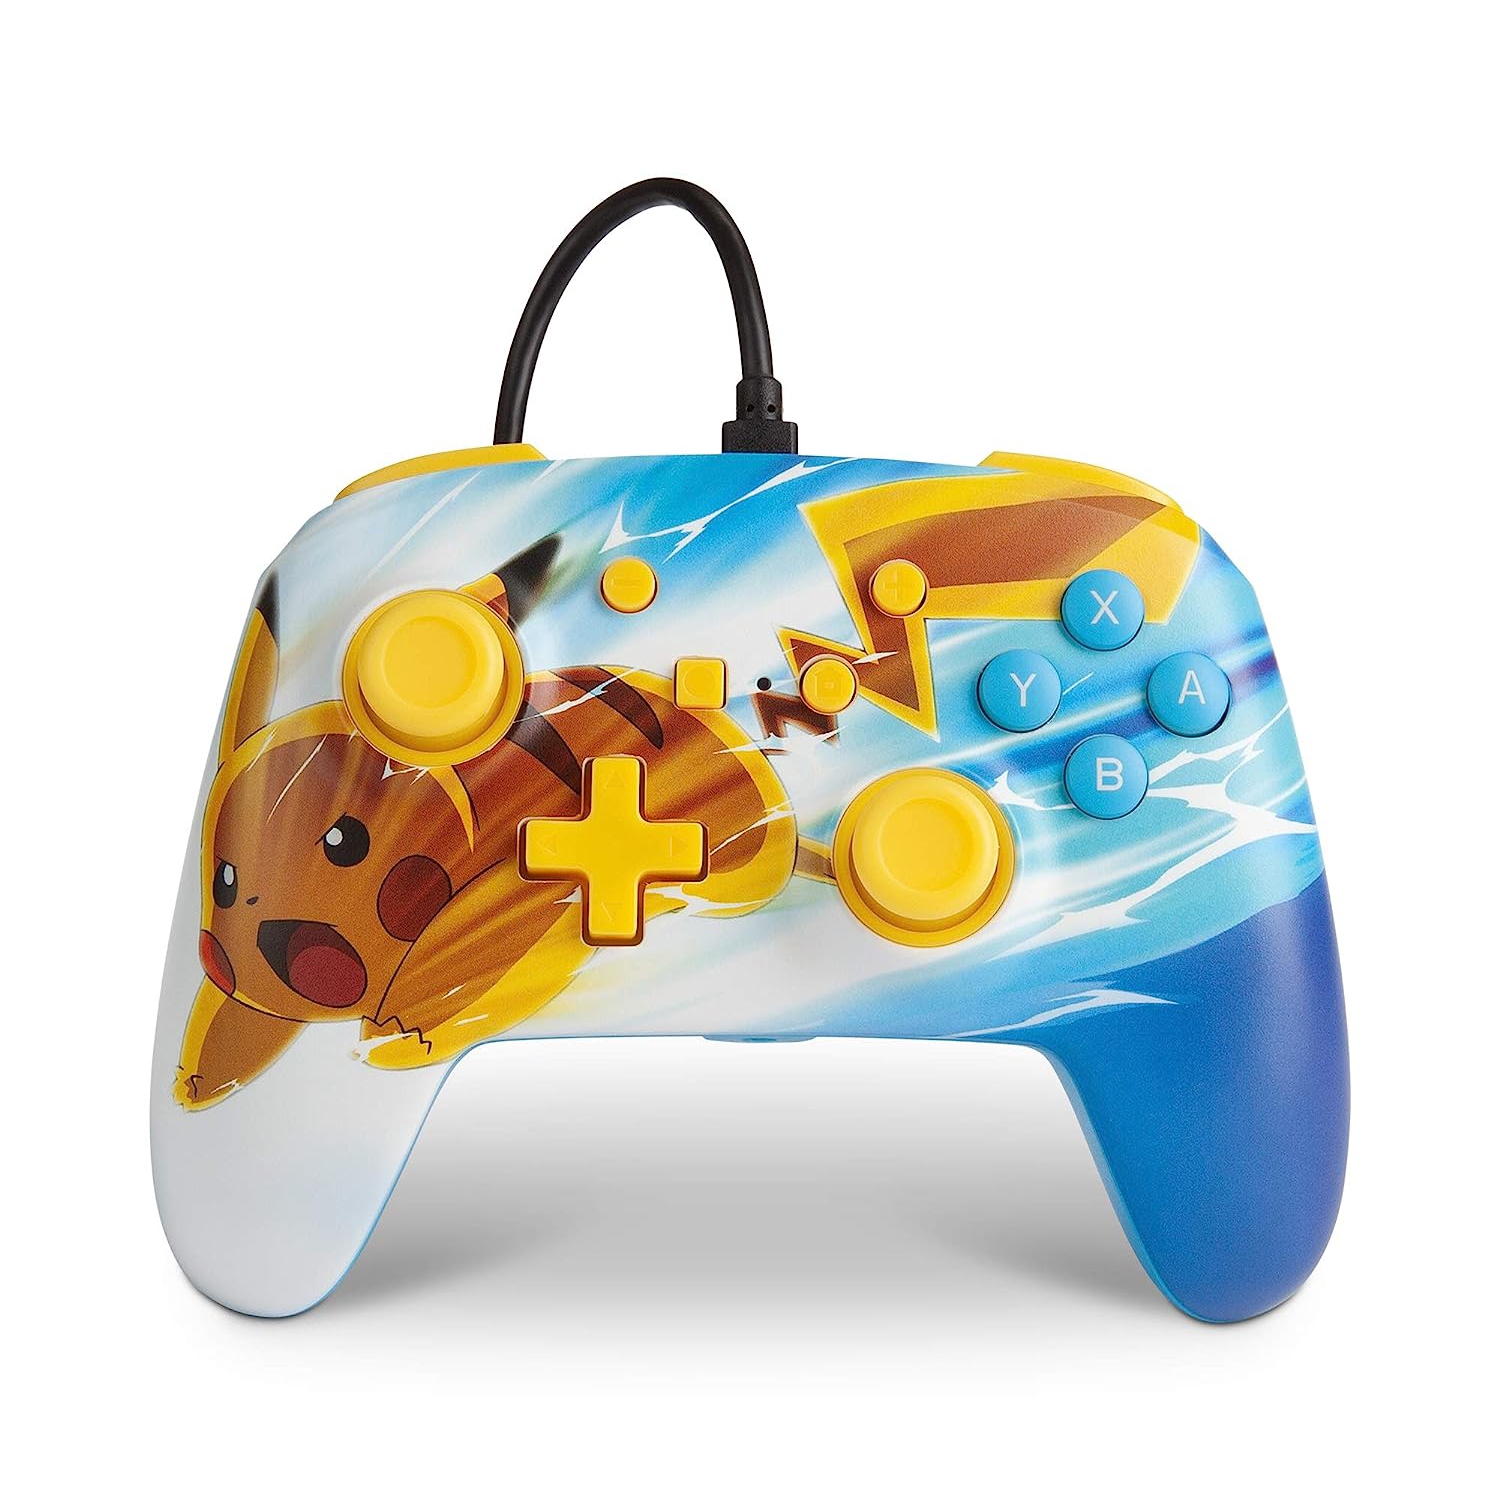 Openbox PowerA Enhanced Wired Controller for Nintendo Switch - Pokémon: Pikachu Charge